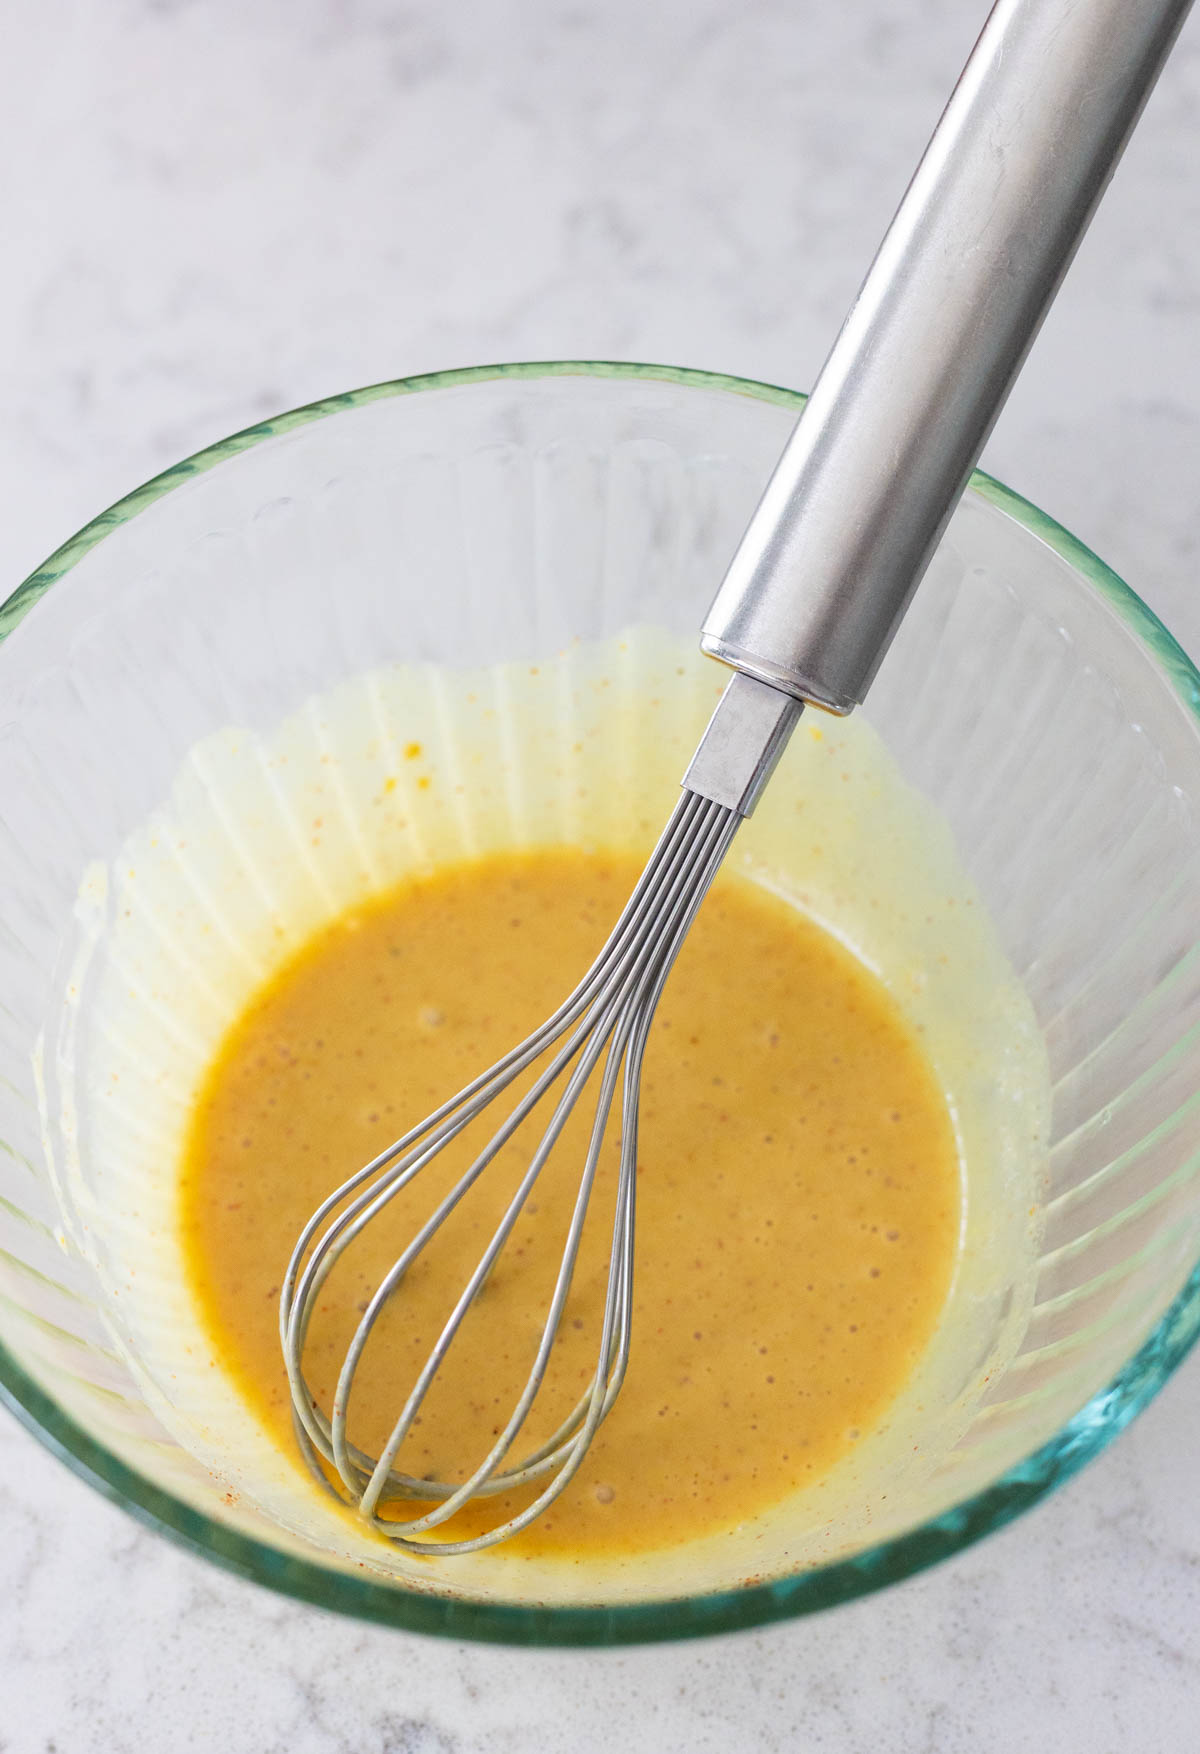 The dip has been whisked together and is a smooth and creamy yellow.